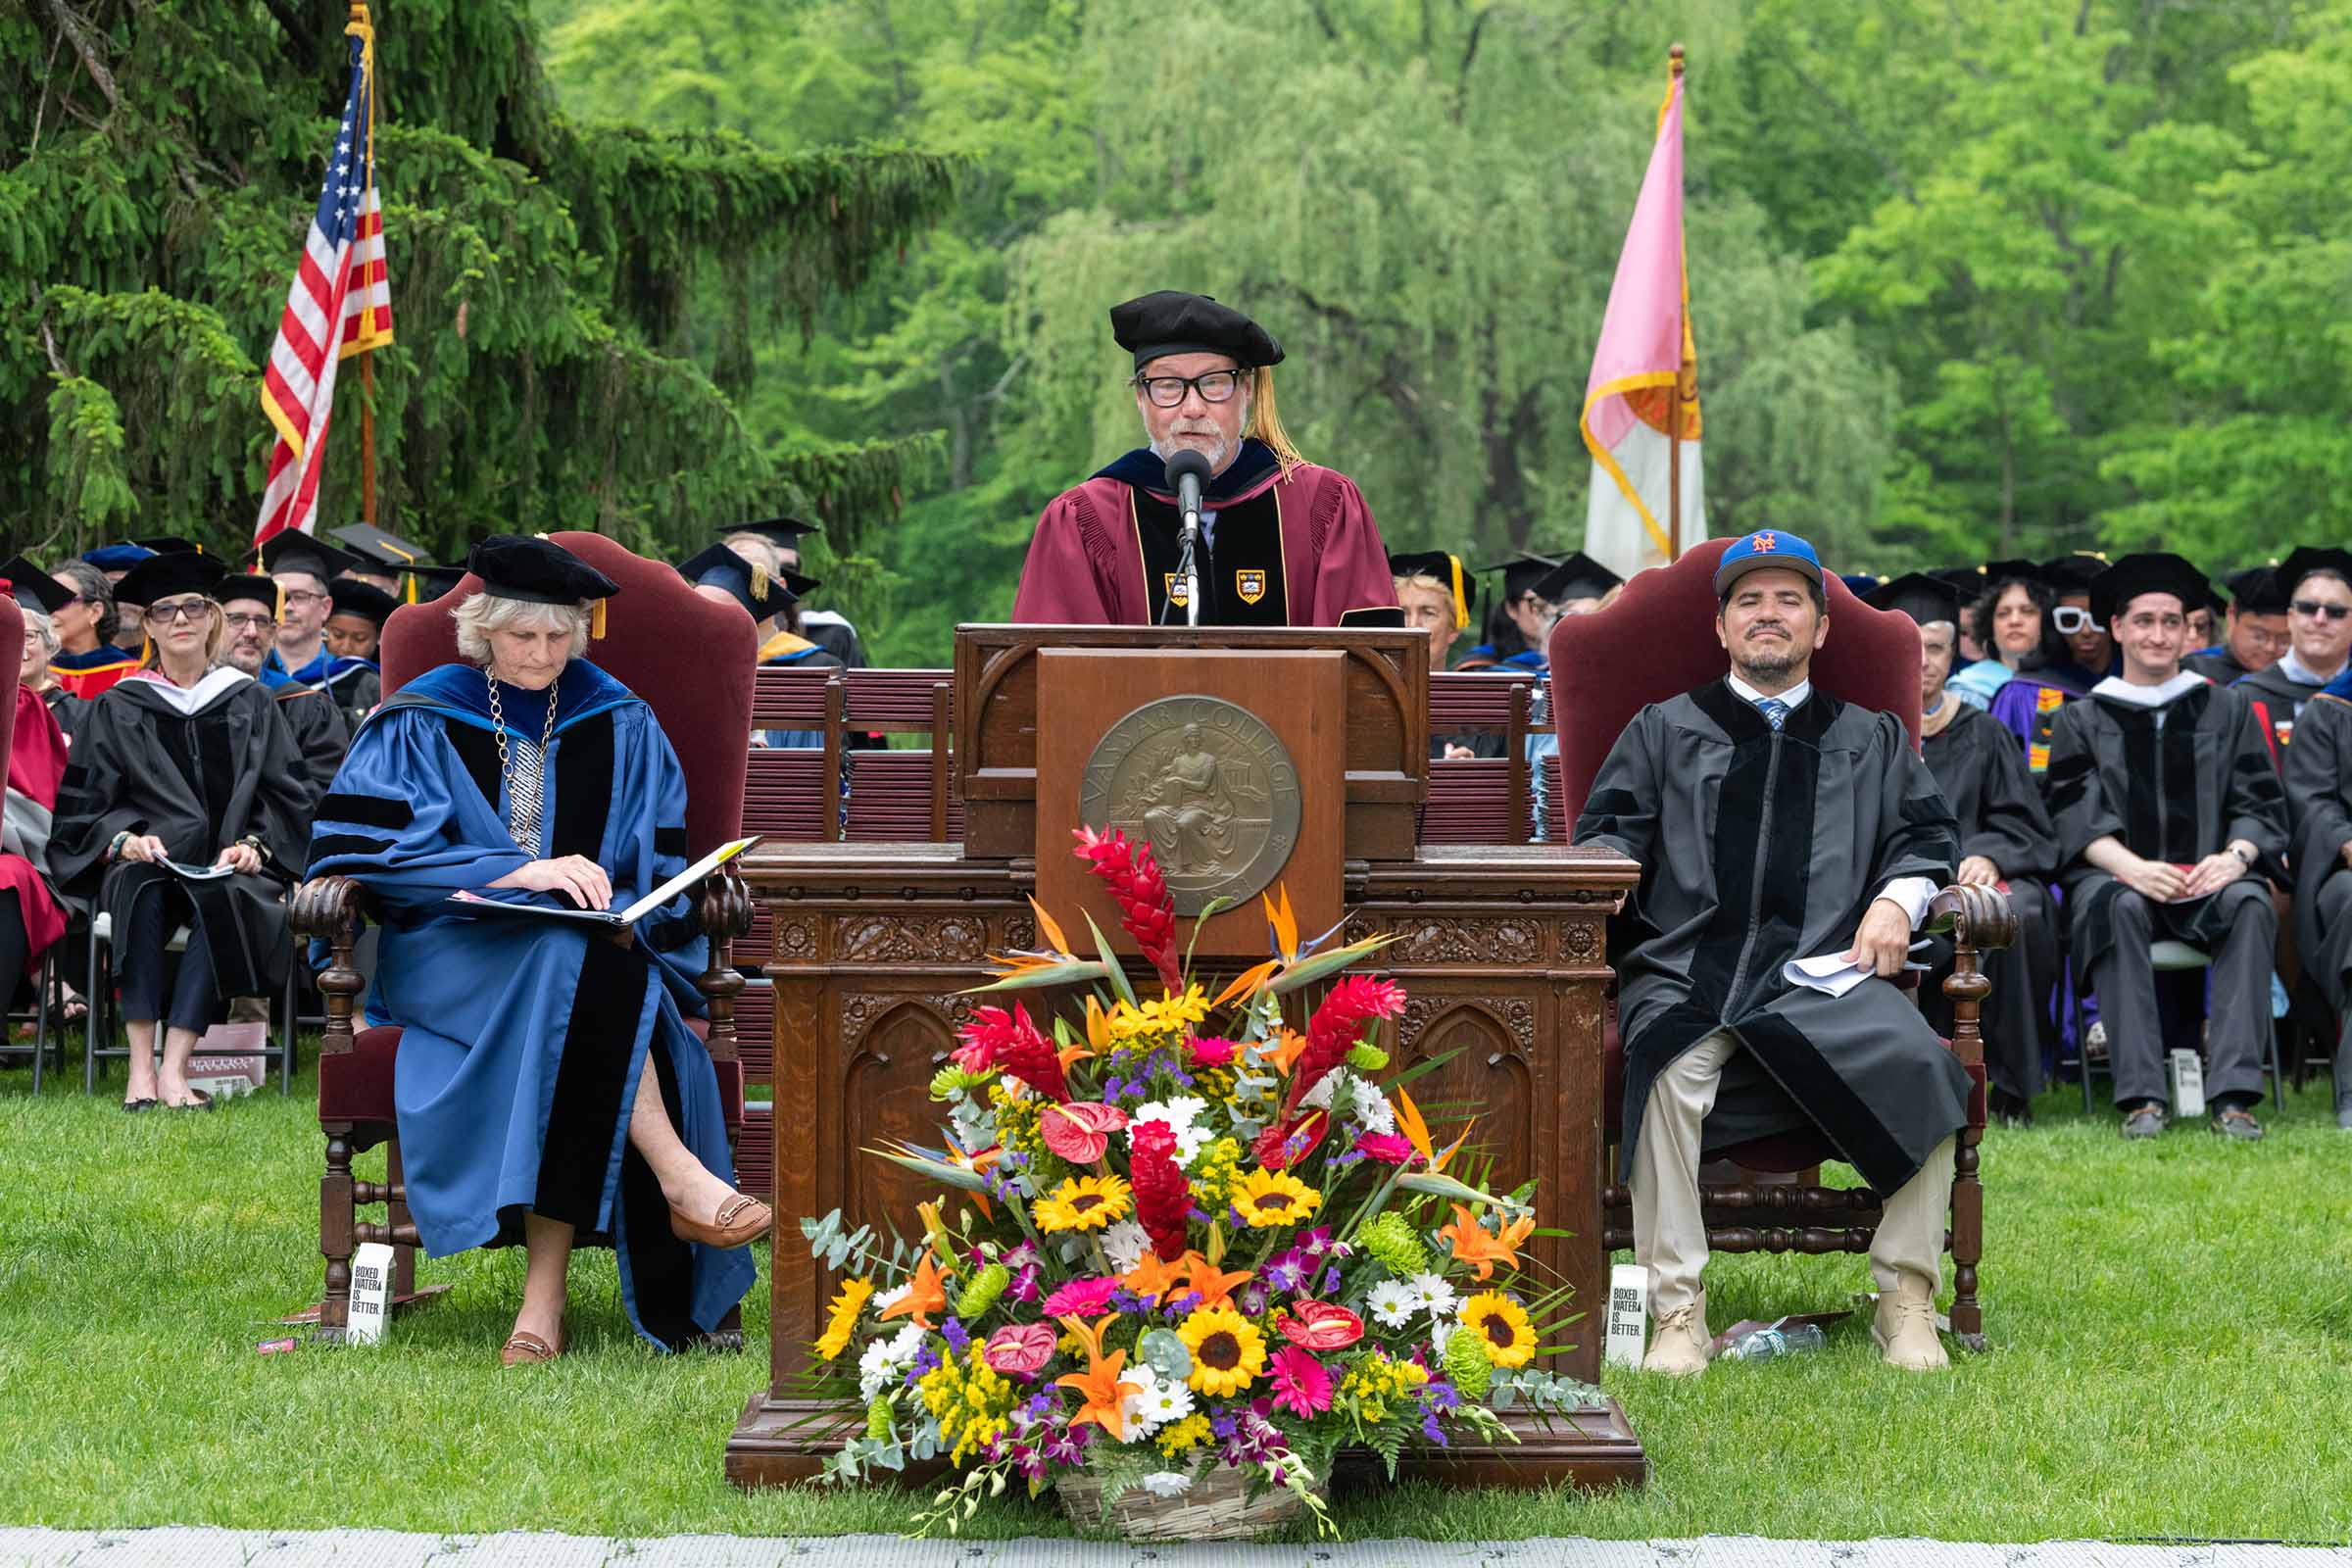 Williams Hoynes, Dean of the Faculty, paid tribute to retiring faculty members.